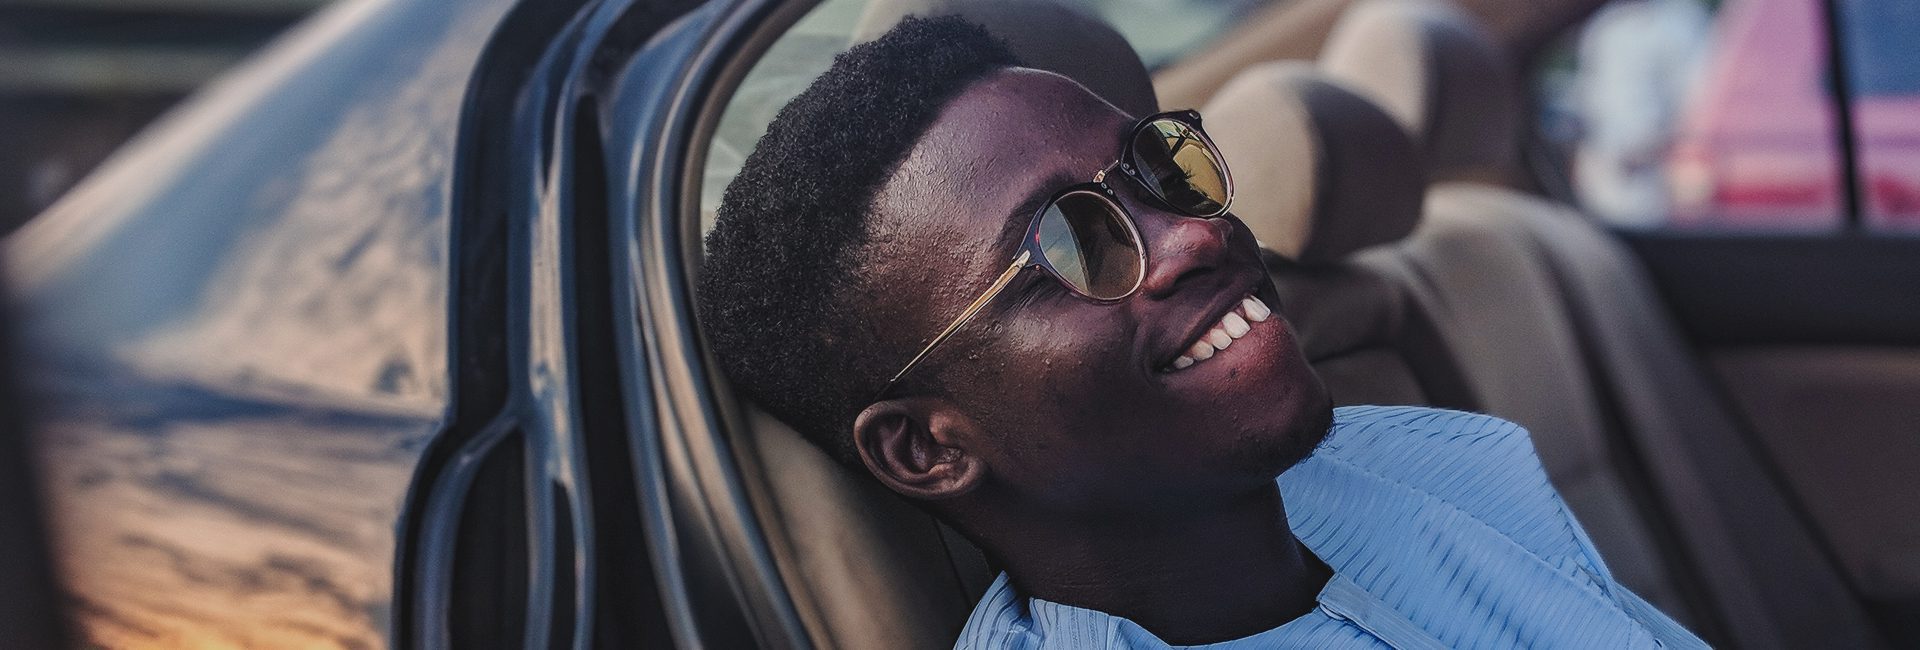 A man in sunglasses leans back in a car seat, looking up with a relaxed and happy demeanor.